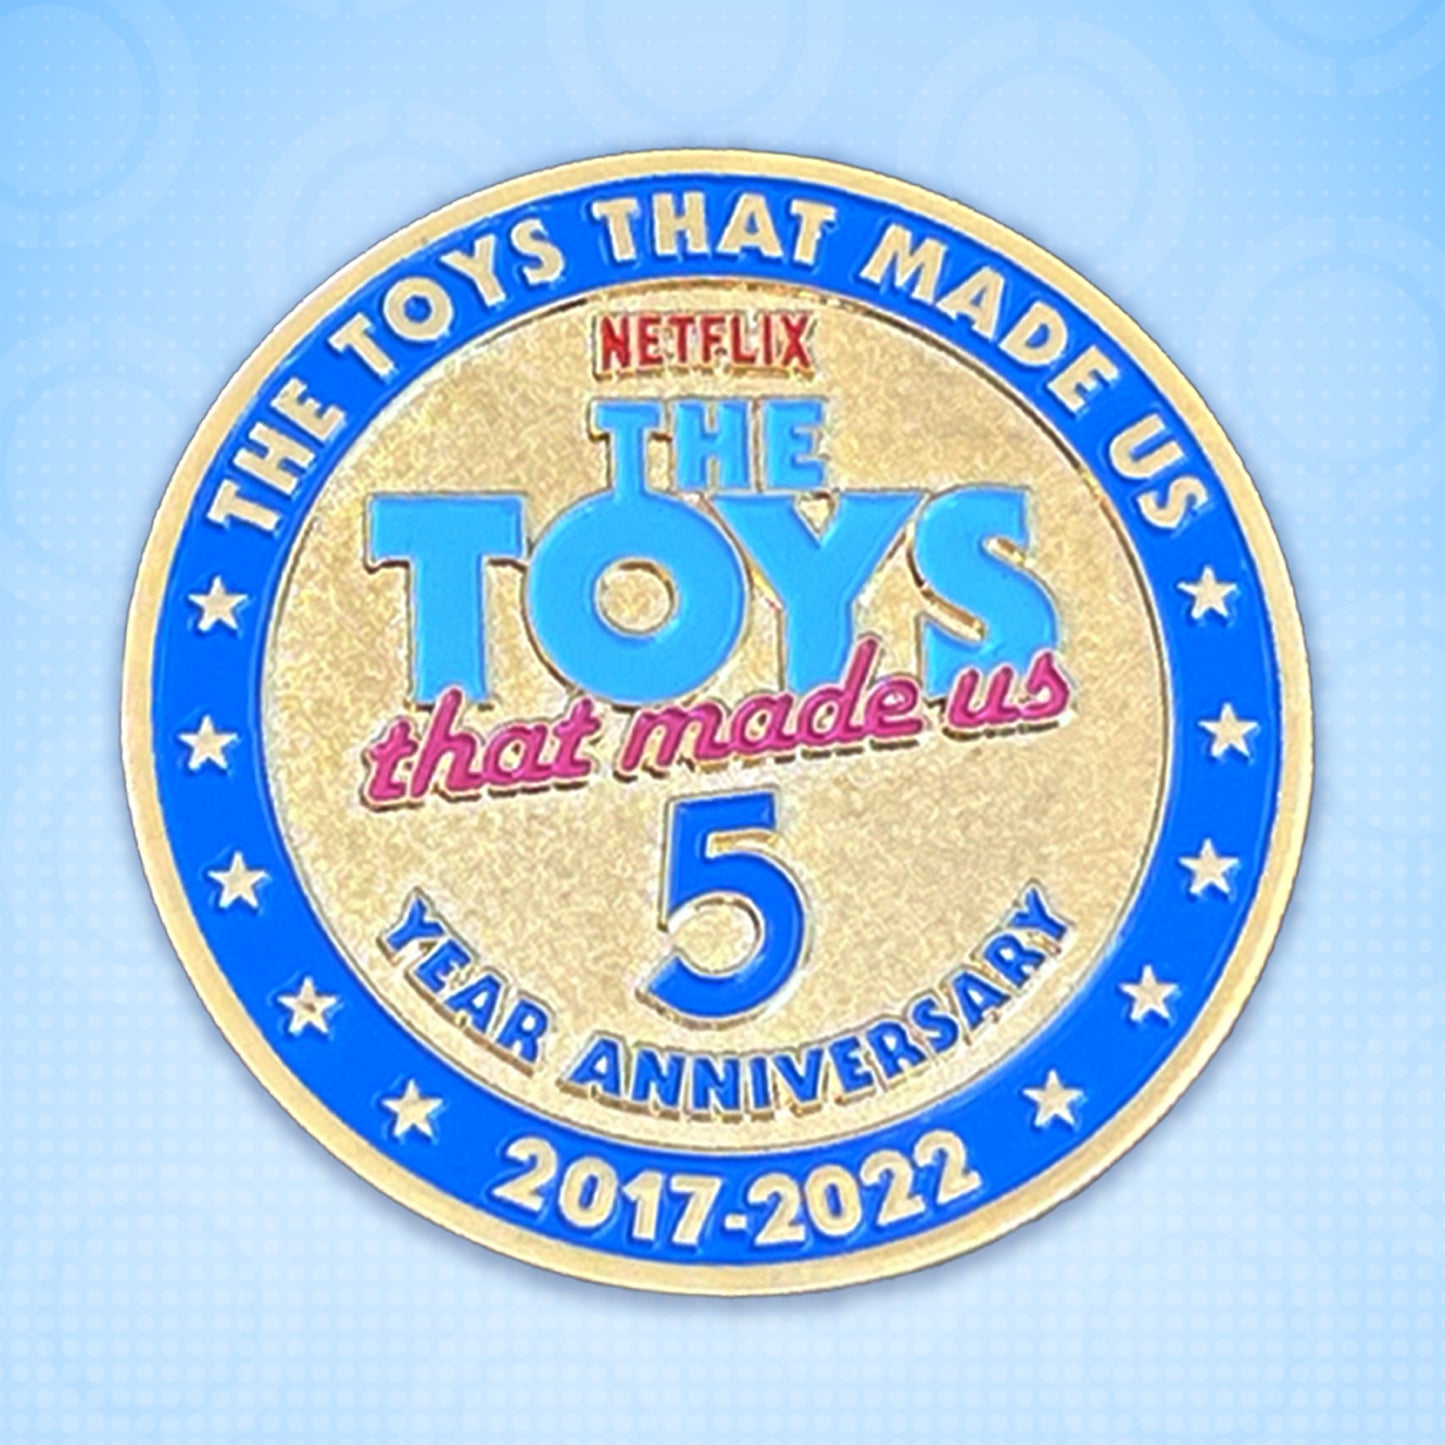 The Toys That Made Us 5 Year Anniversary Coin